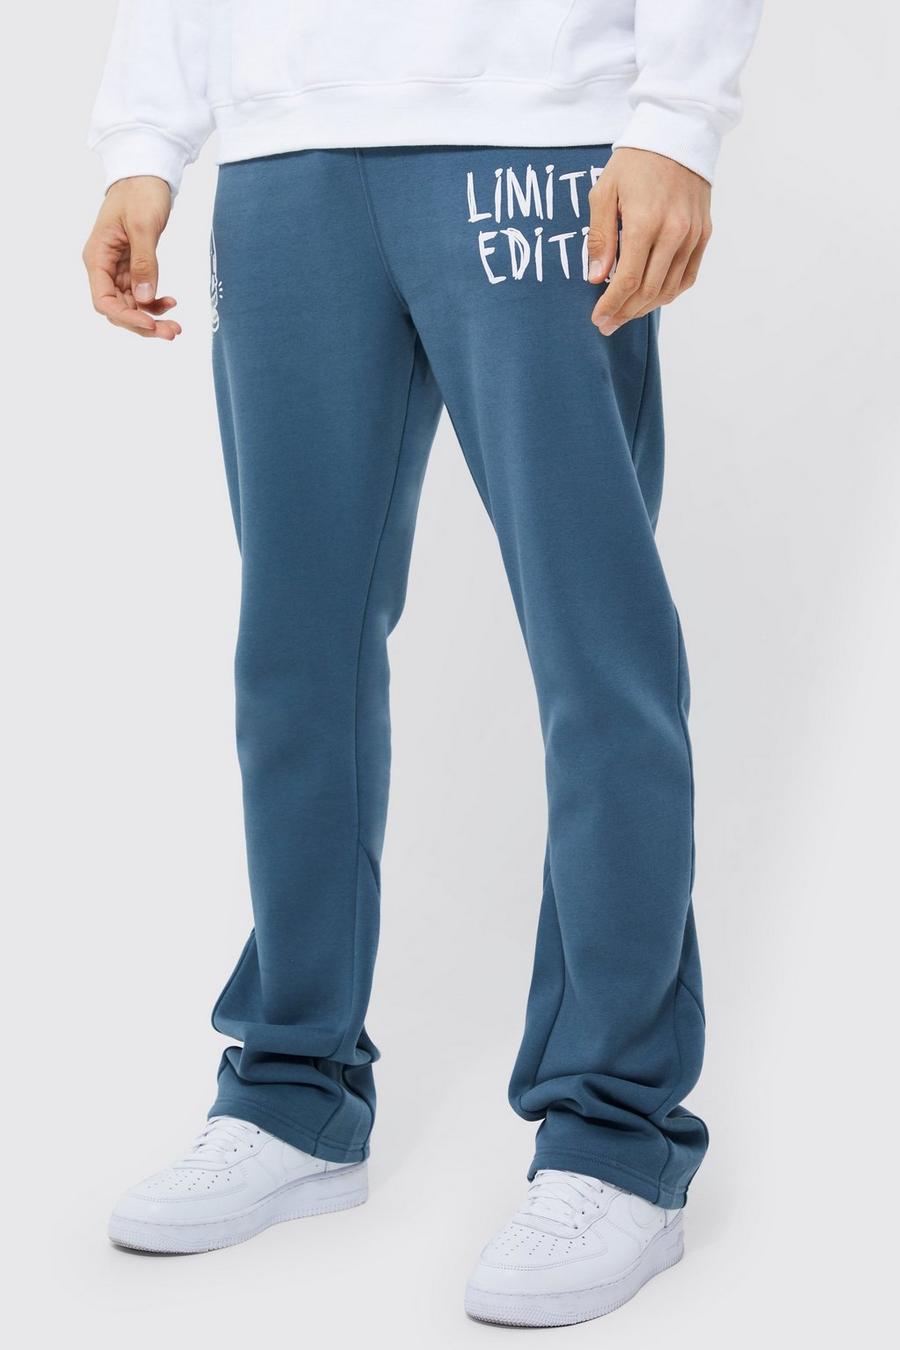 Slate blue Tall Slim Fit Limited Edition Gusset Jogger